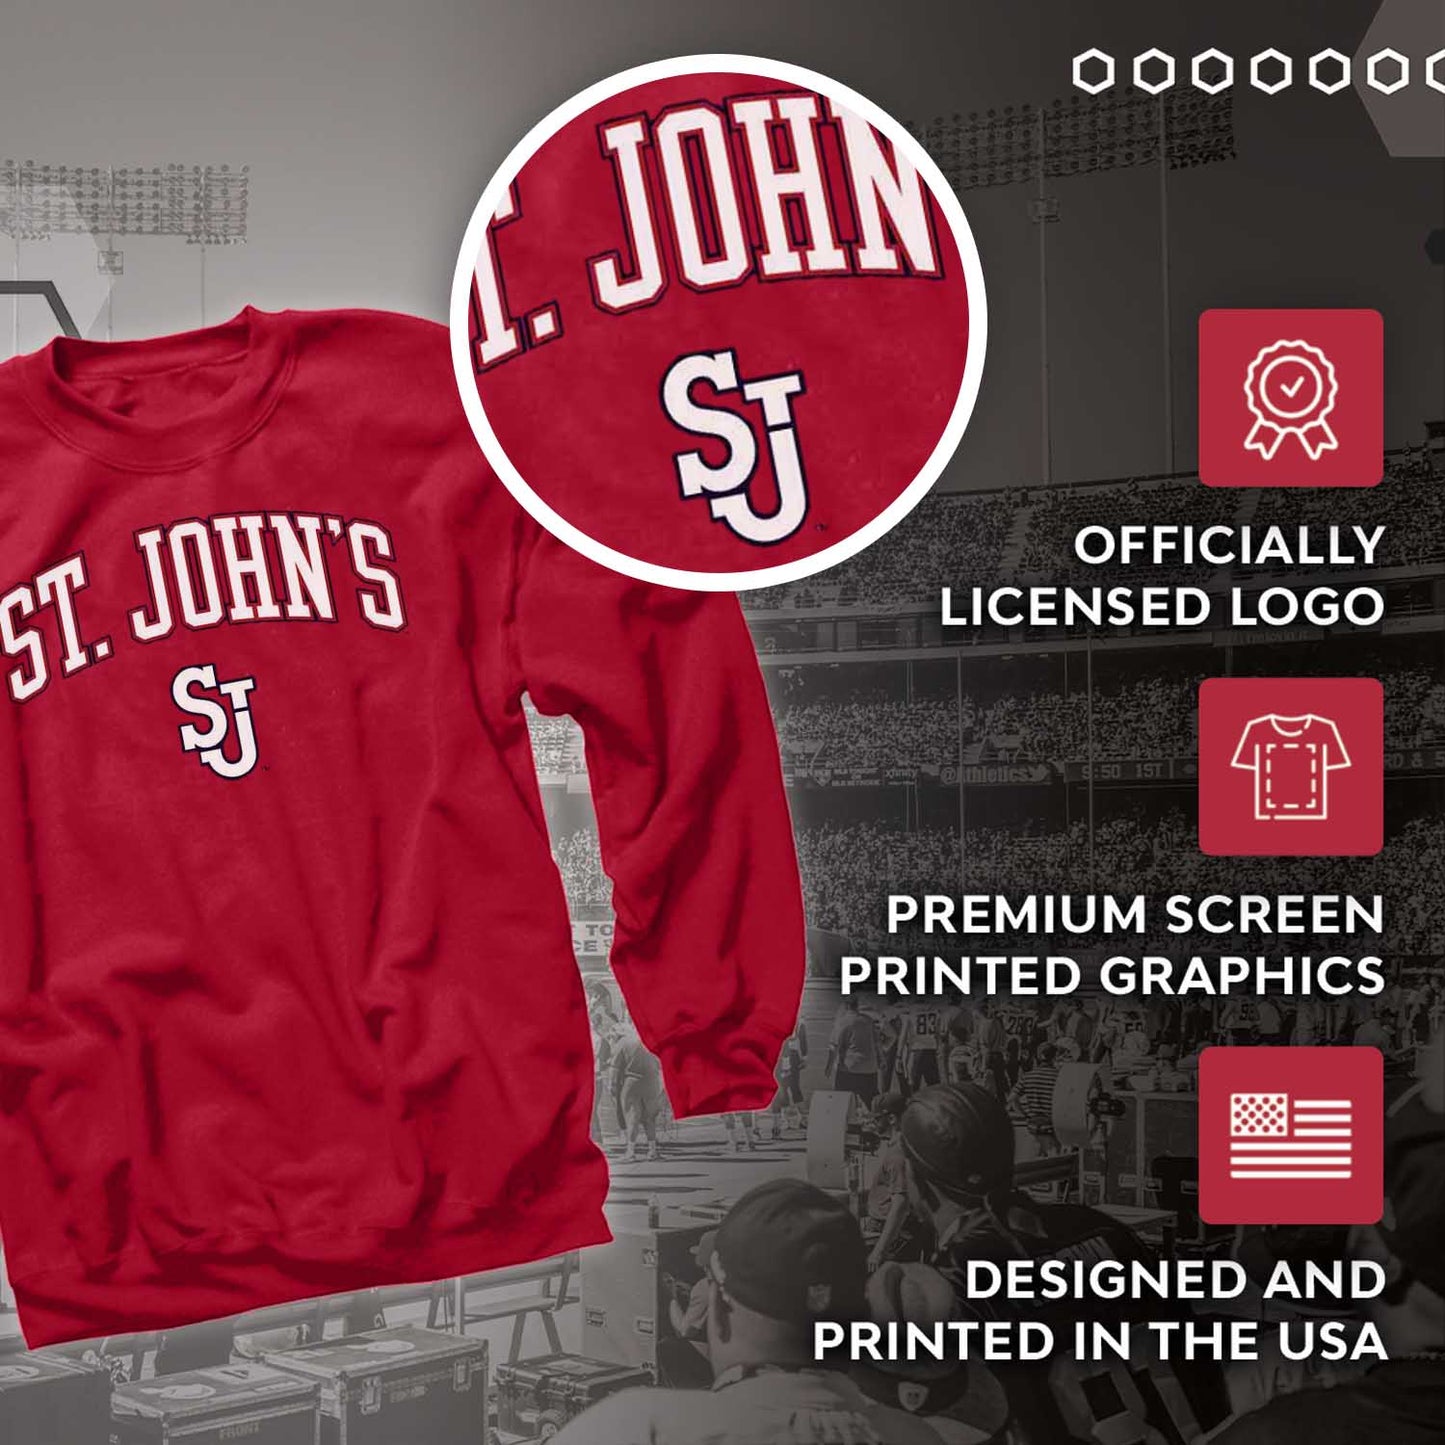 St. John's Red Storm Adult Arch & Logo Soft Style Gameday Crewneck Sweatshirt - Red